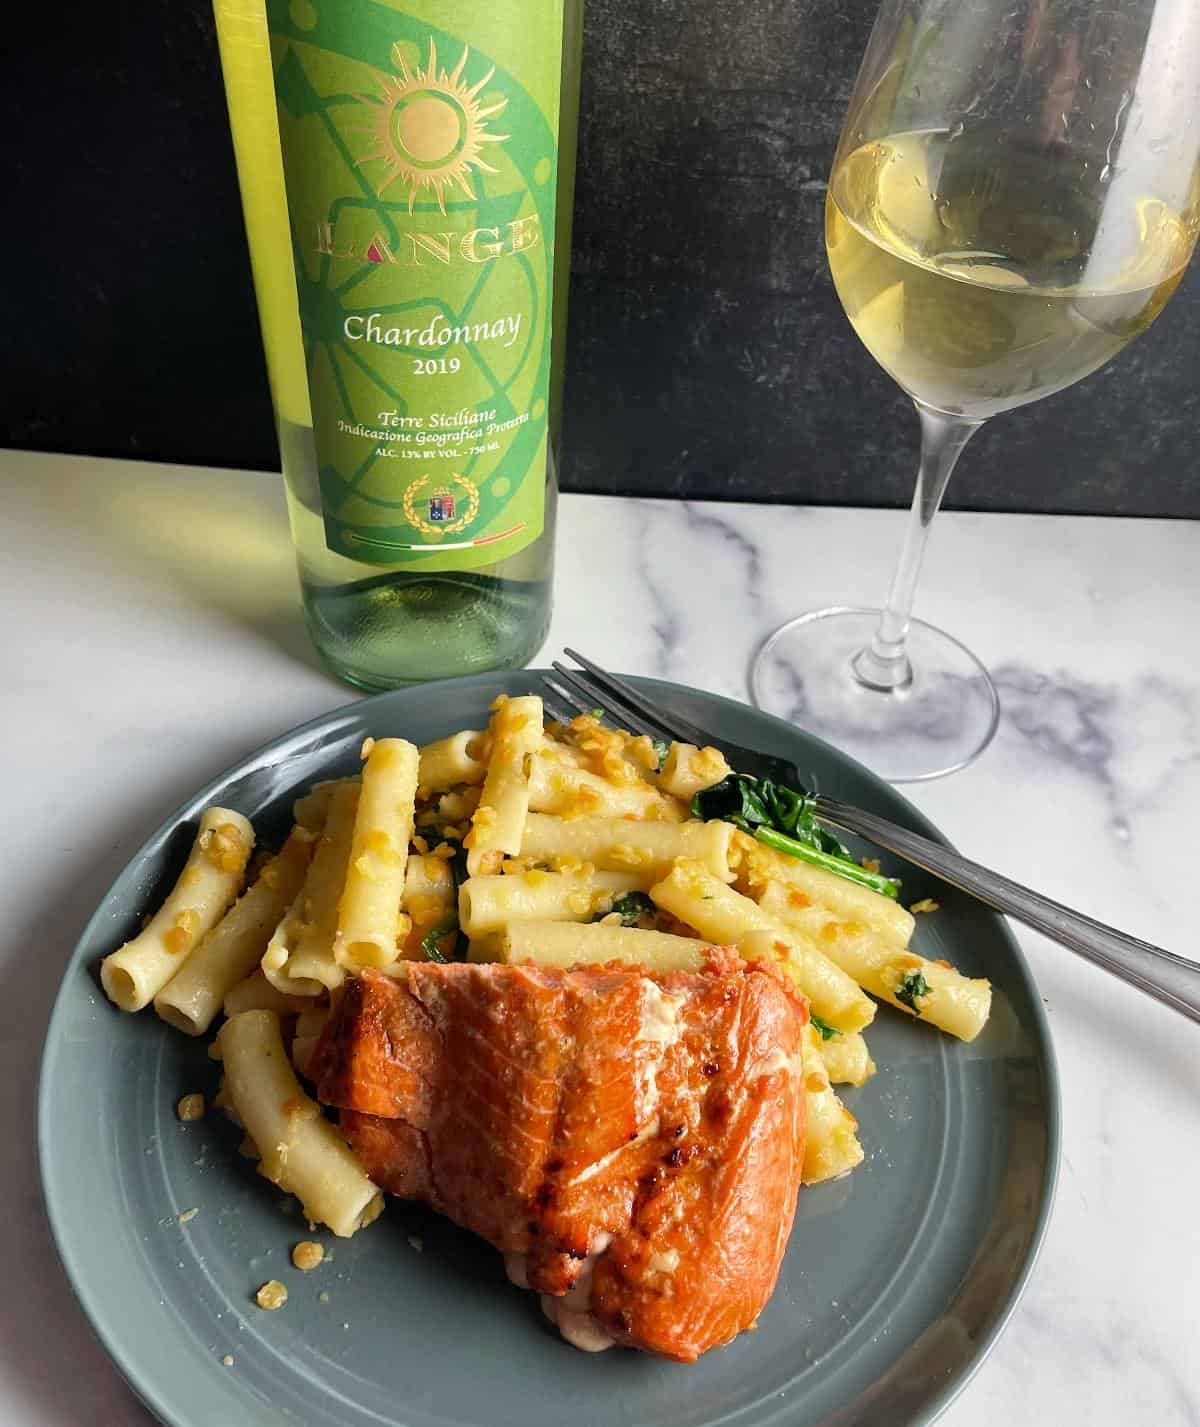 Salmon plated with ziti pasta and served with a bottle and glass of Chardonnay.